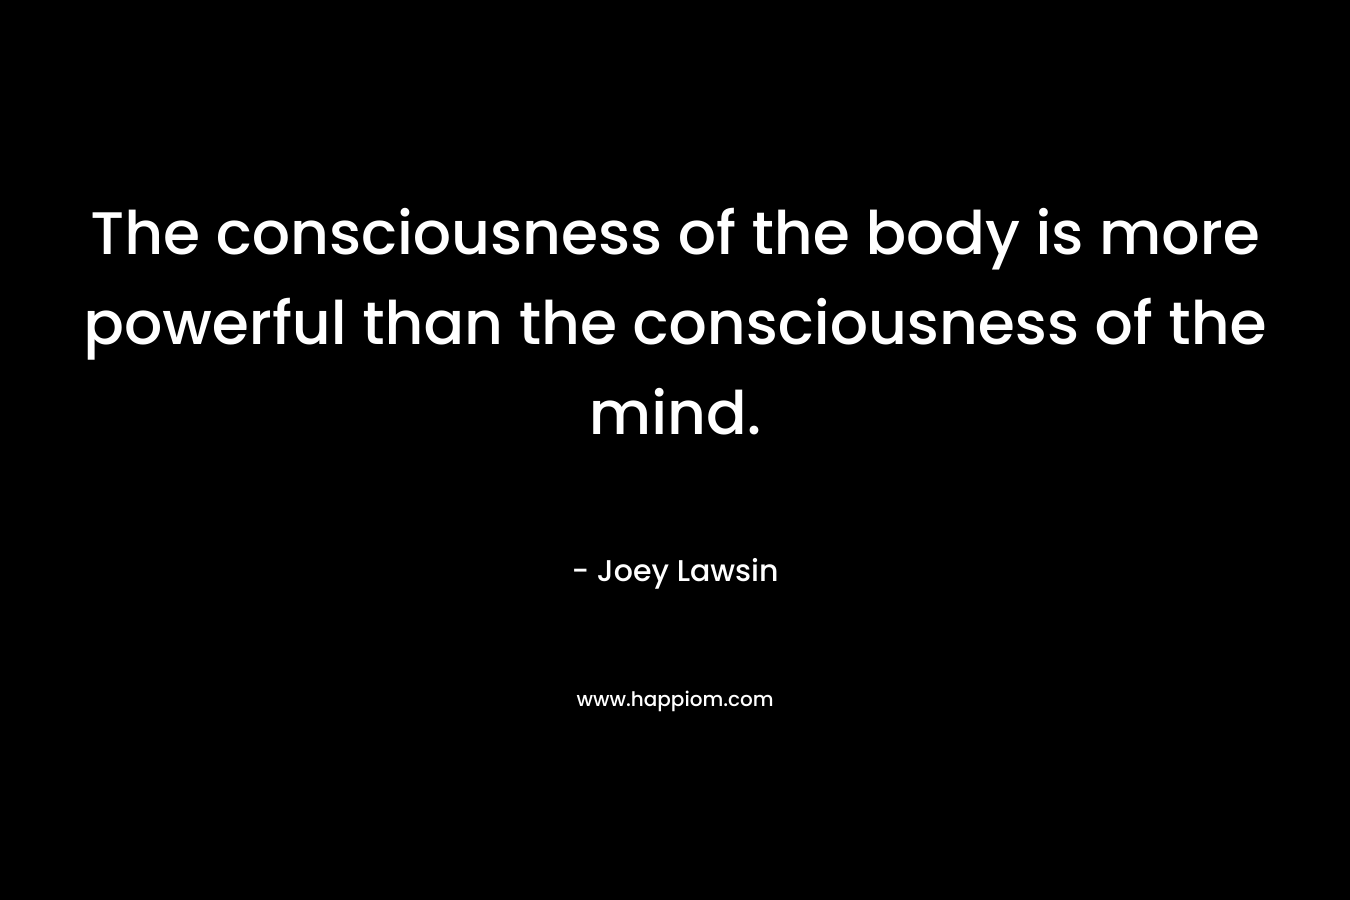 The consciousness of the body is more powerful than the consciousness of the mind.